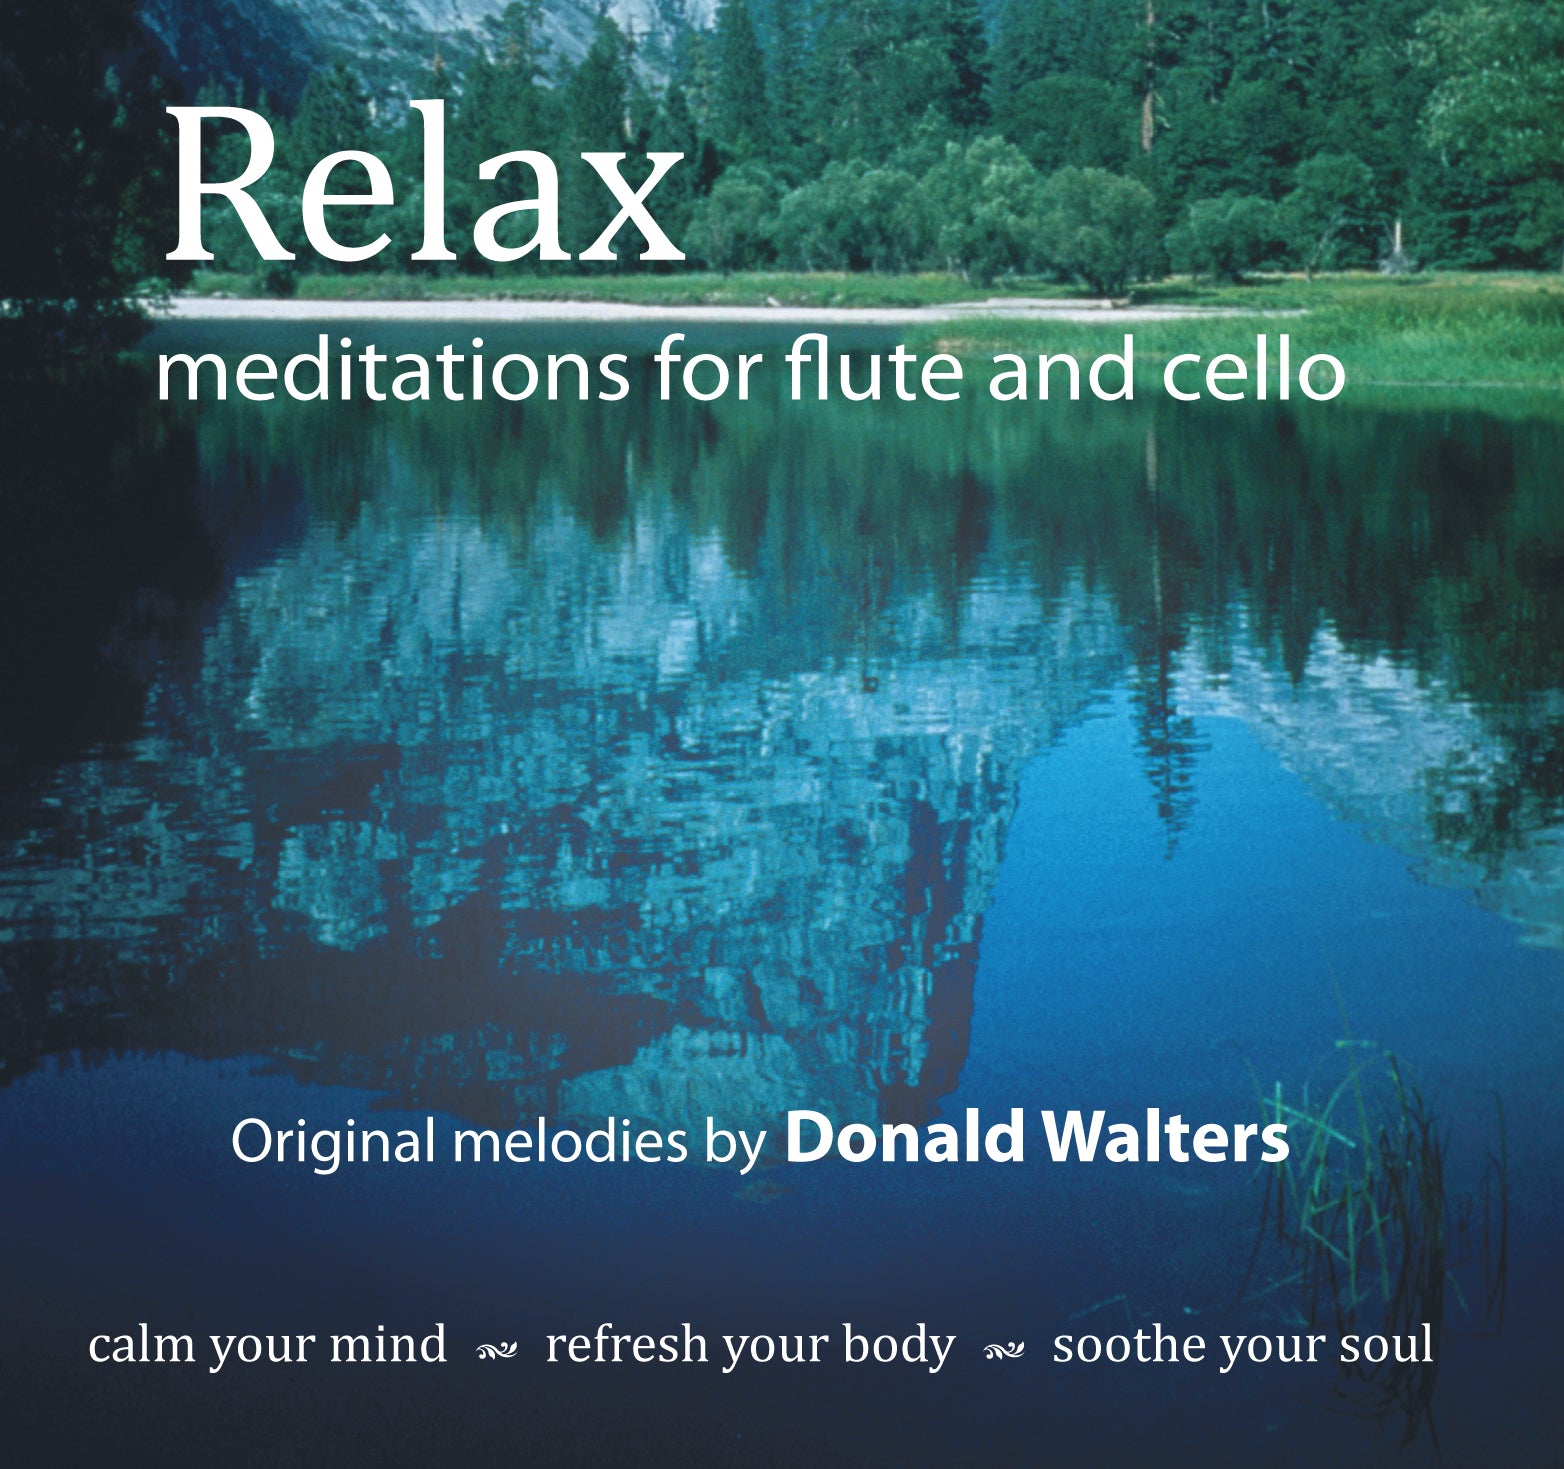 Relax: Meditations for Flute and Cello - Digital